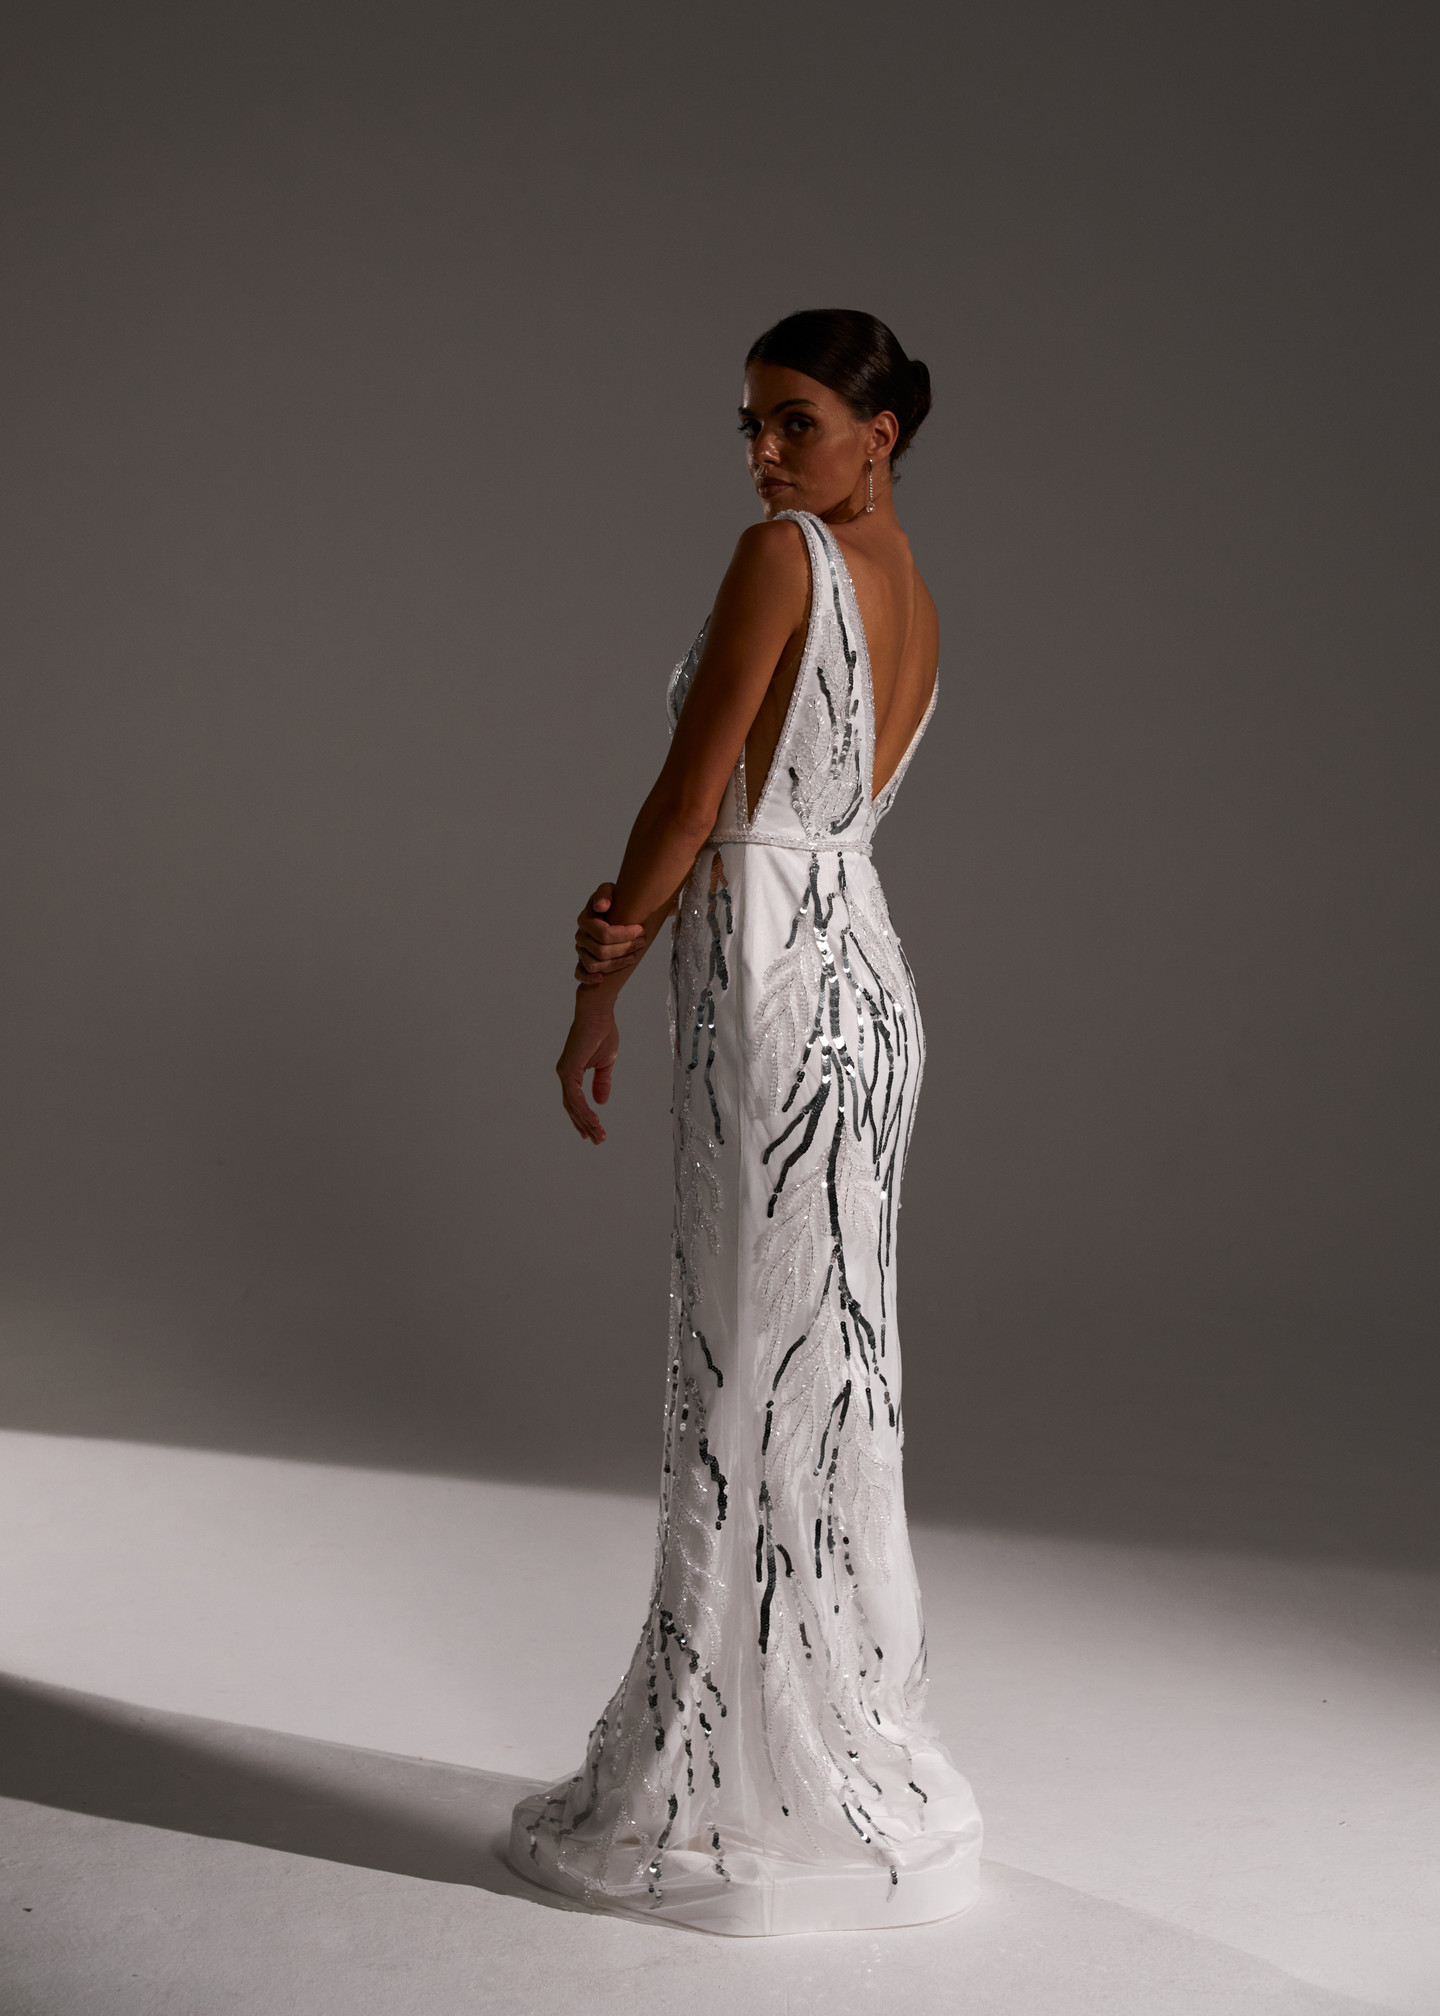 Sierra dress, 2021, couture, dress, bridal, off-white, embroidery, sheath silhouette